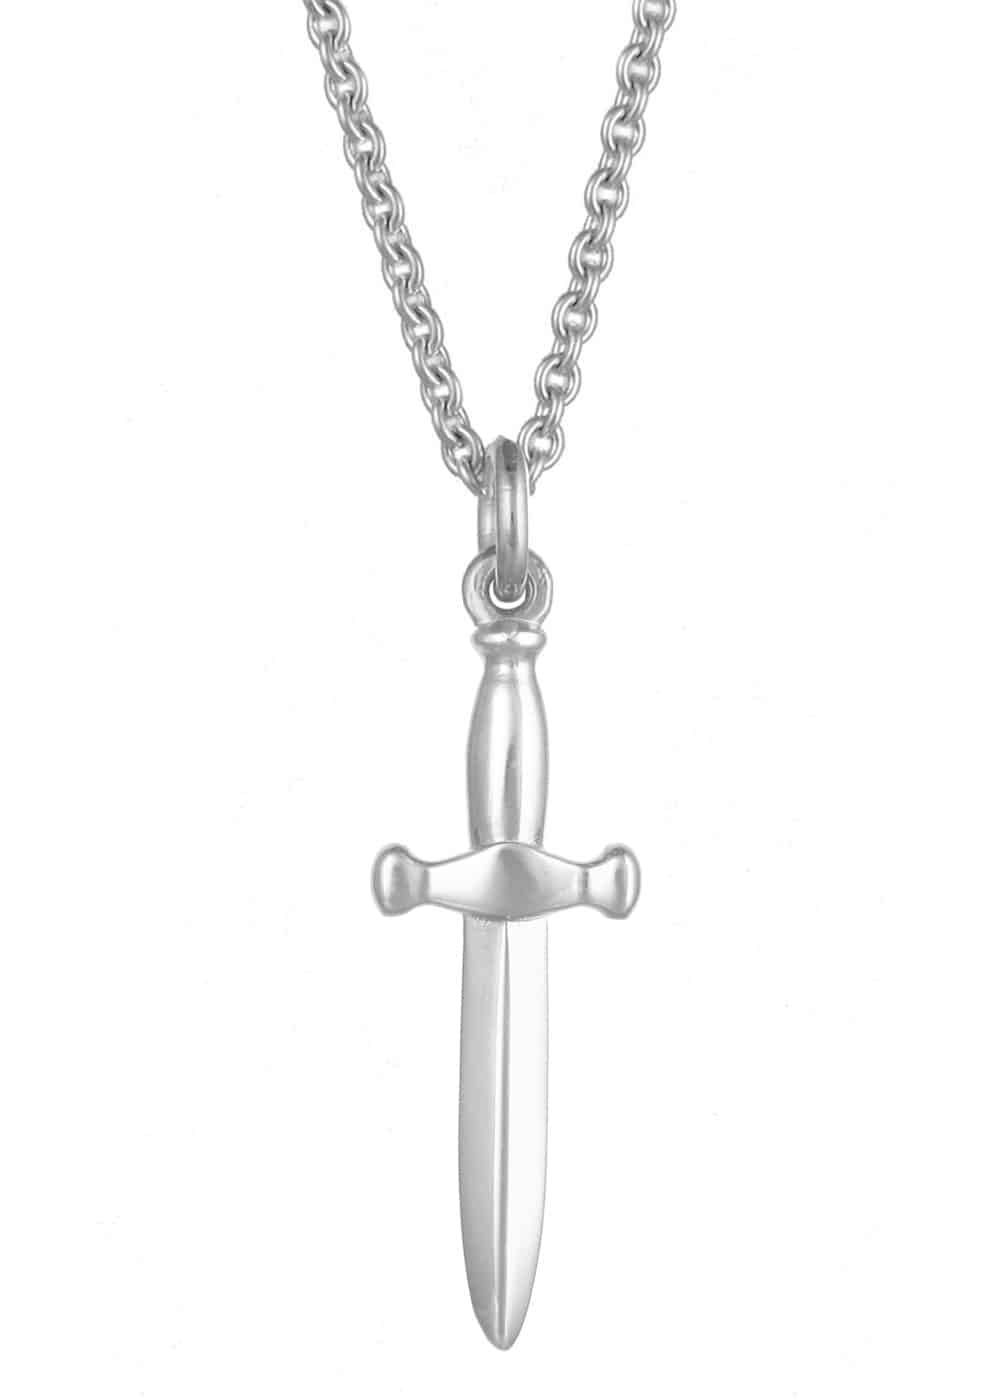 Dagger Necklace Silver | Sterling Silver & Gold Vermeil Jewellery ...